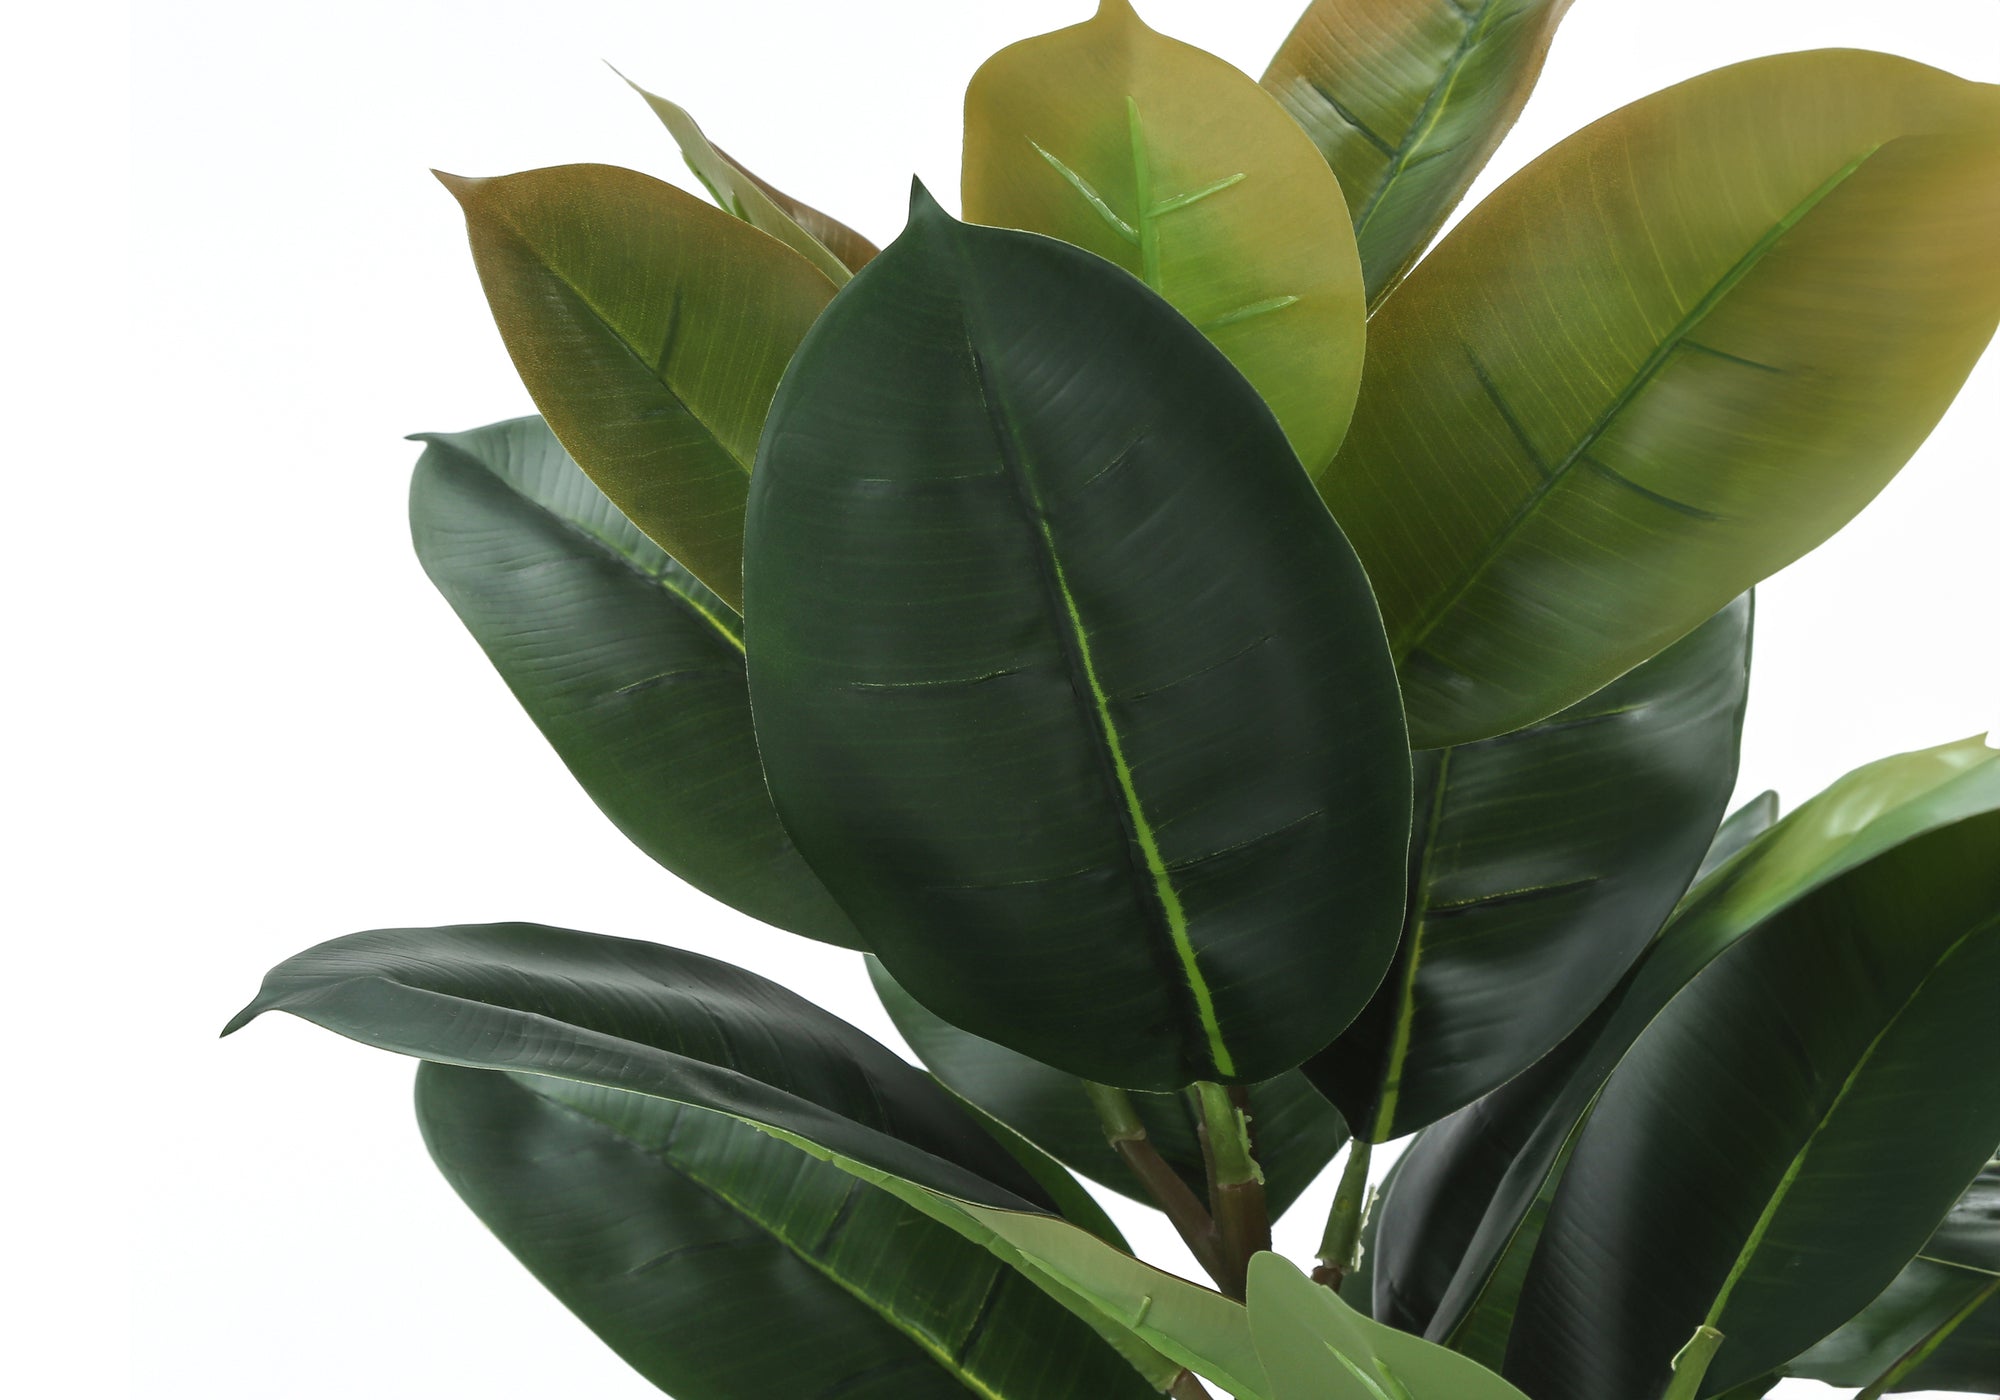 ARTIFICIAL PLANT - 40"H / INDOOR RUBBER TREE IN A 5" POT